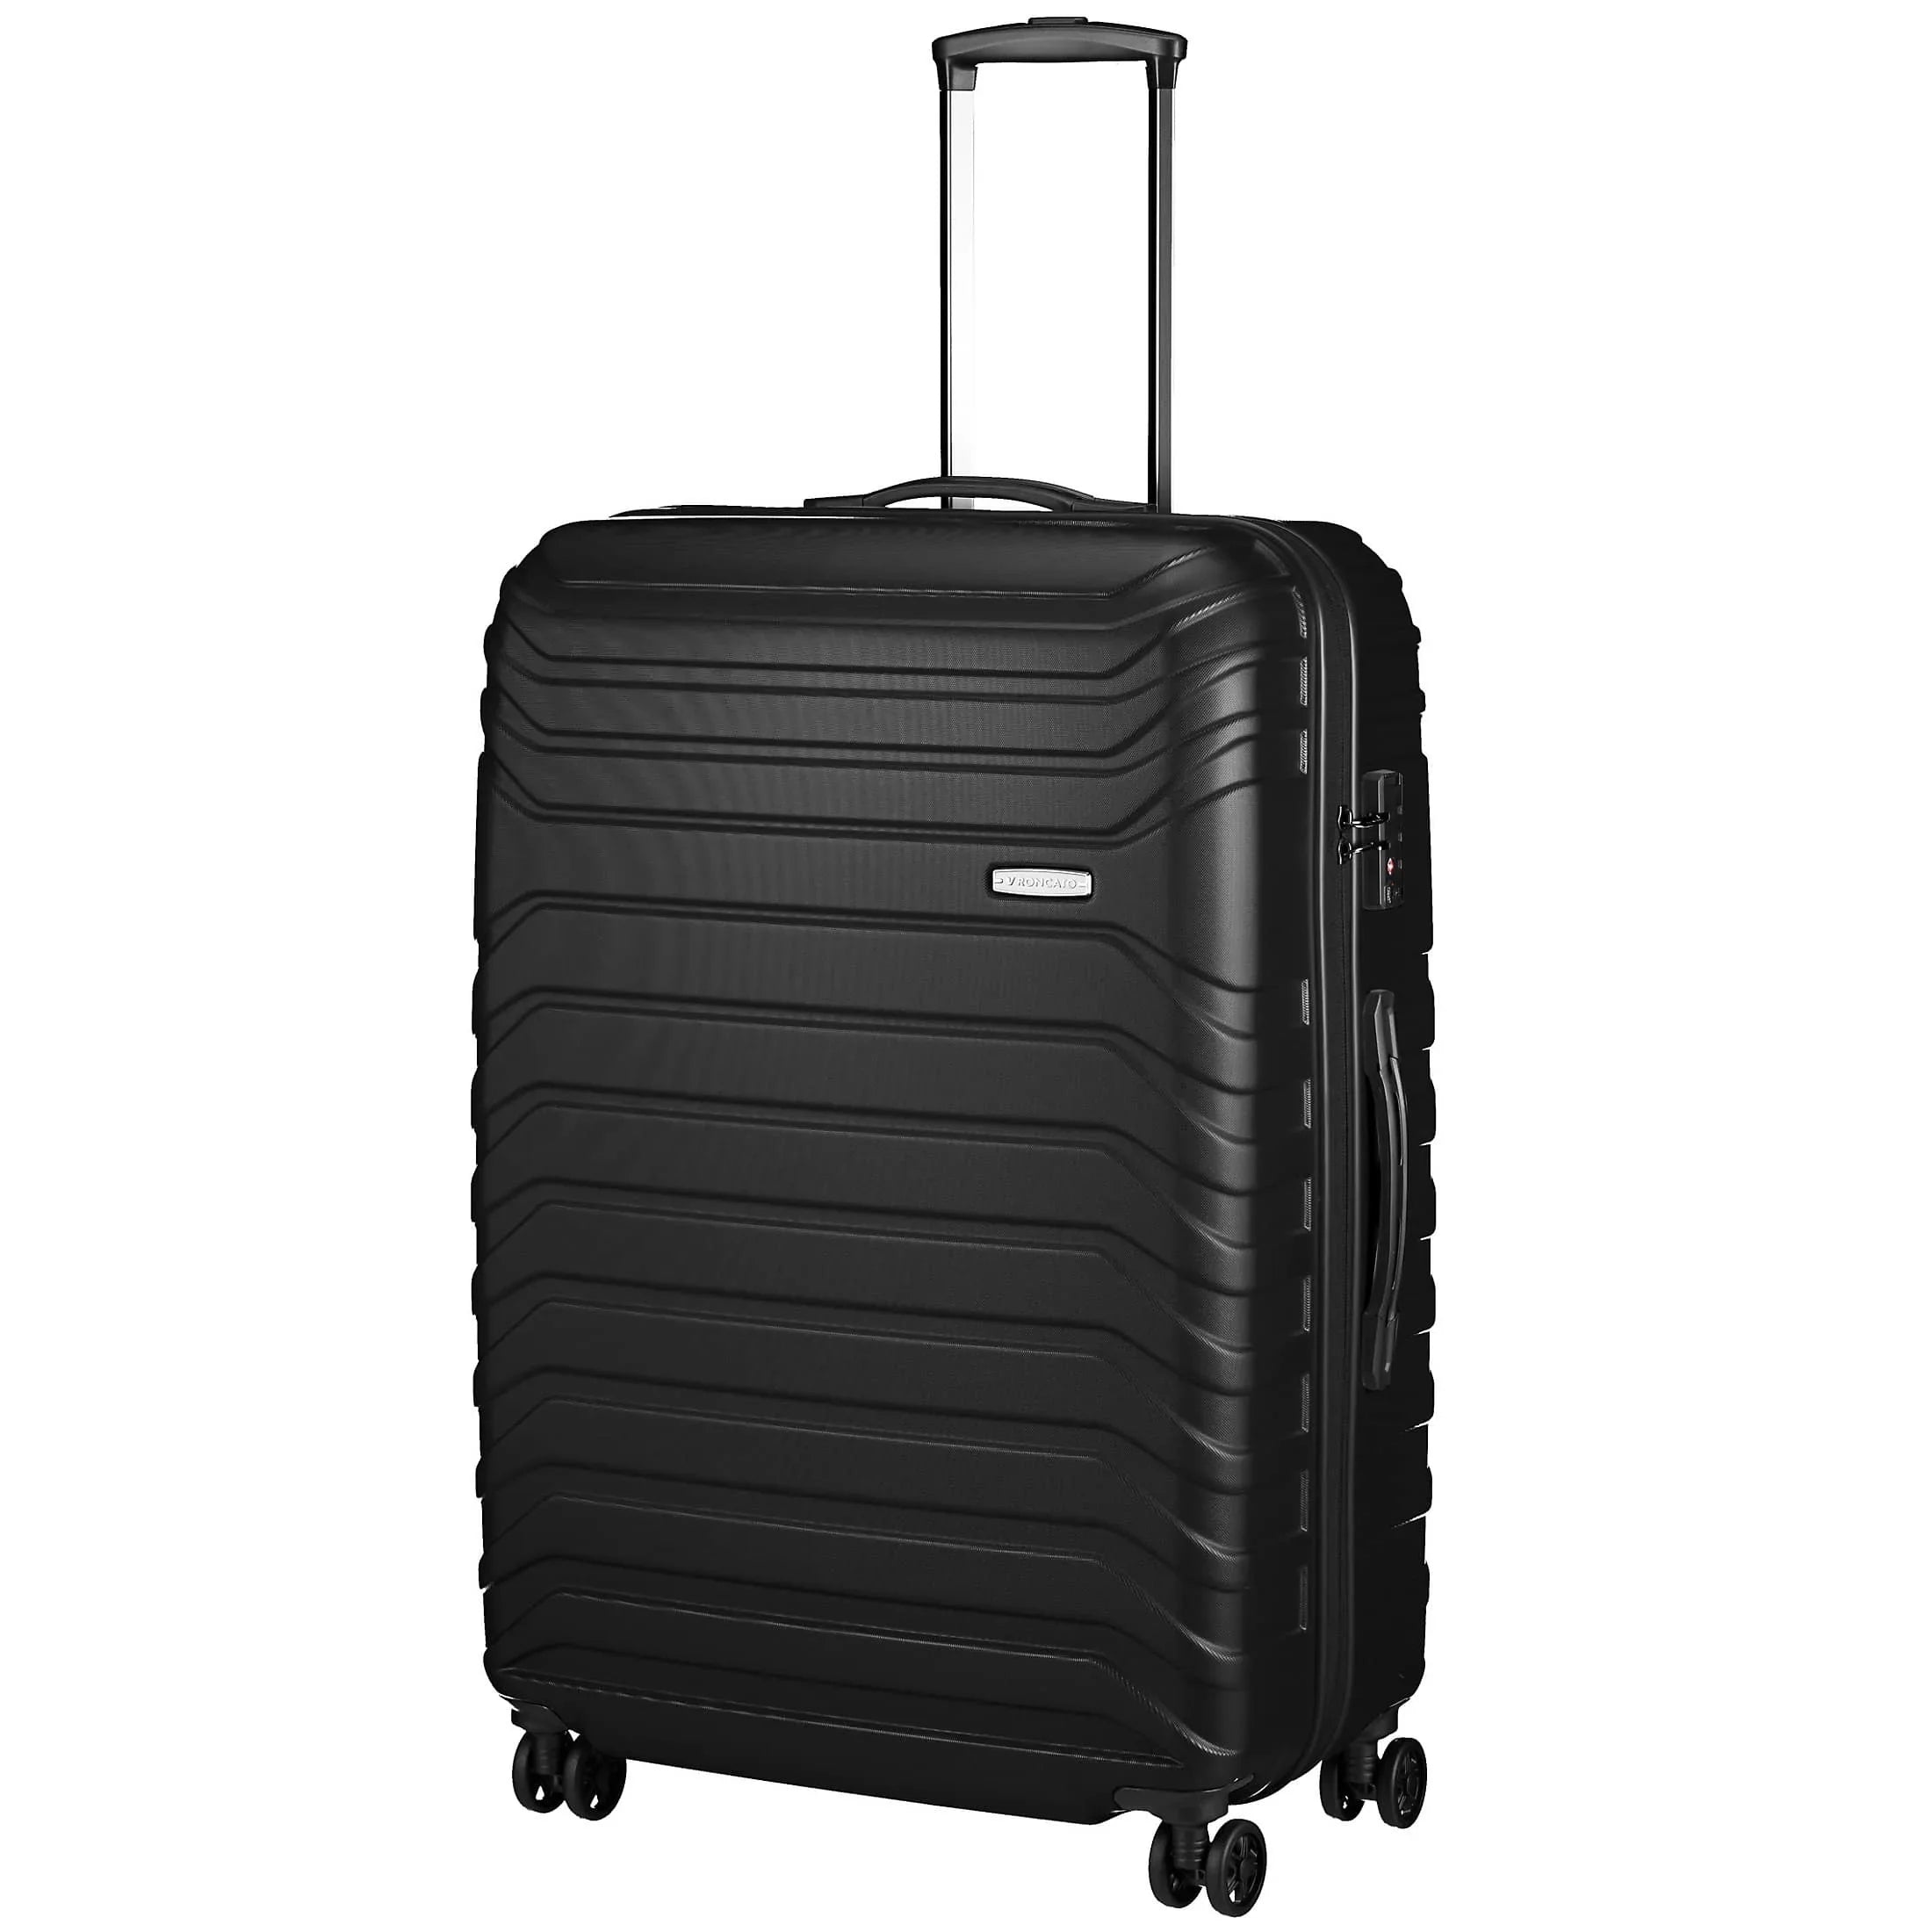 Roncato - modern luggage for from Page business 2 – vacation and Italy